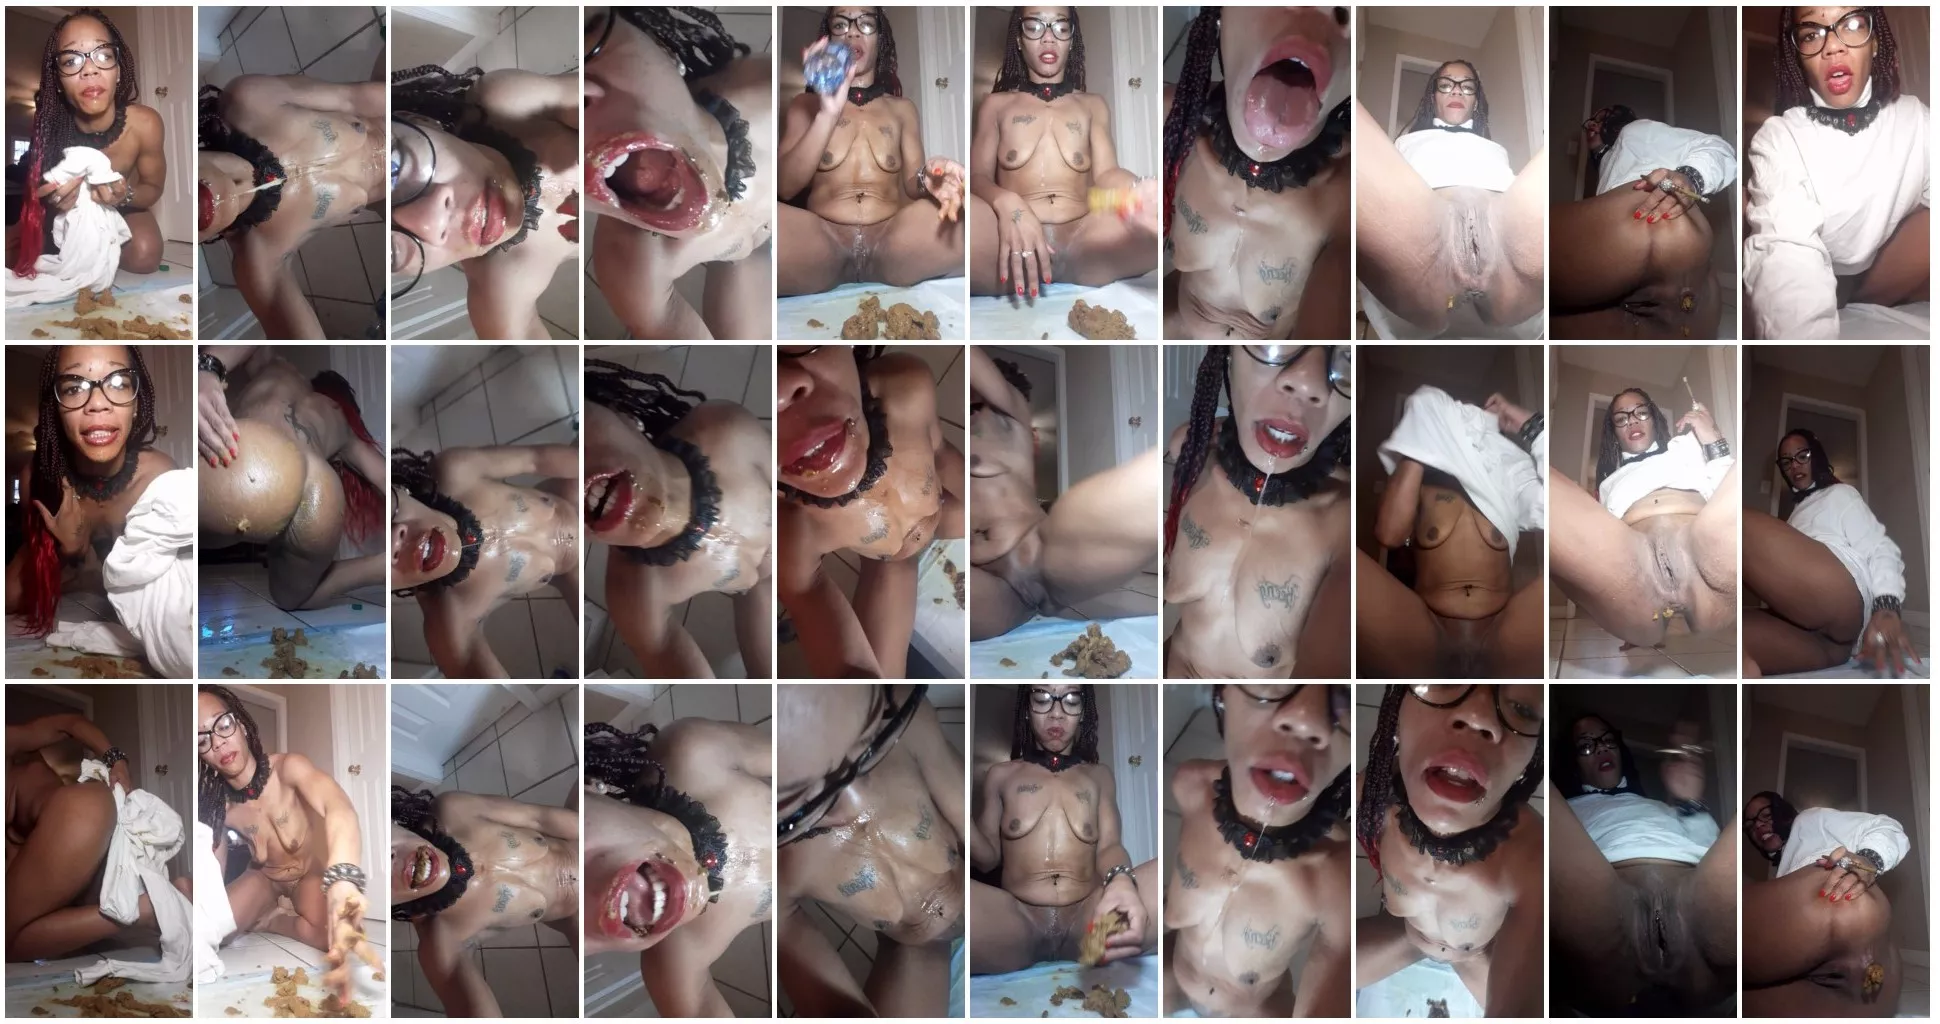 UniElla  being UniElla take 2 [Scat solo, shit, defecation, Pissing, Dirty Ass, Masturbation, Smearing, Eat shit]